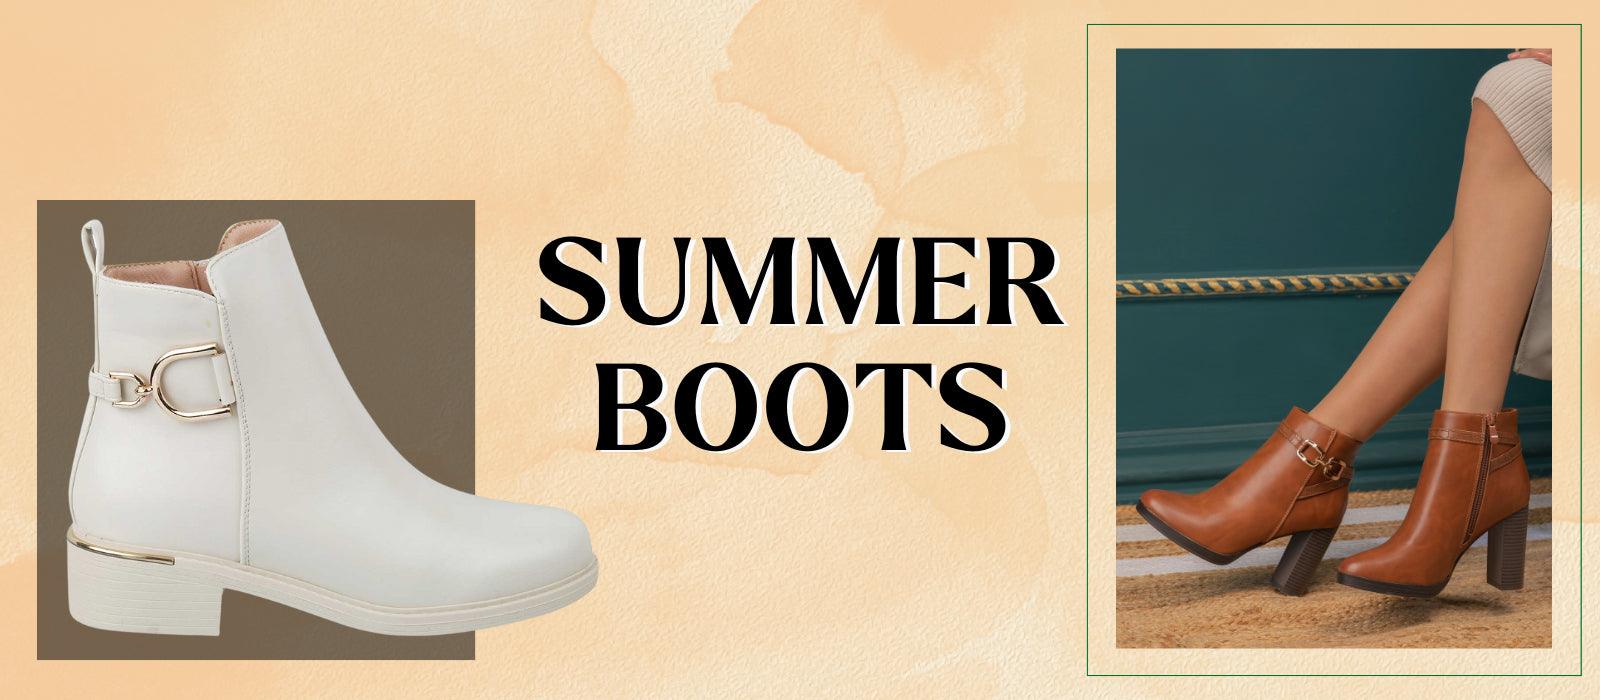 How to style women’s boots in the summer season - Tresmode